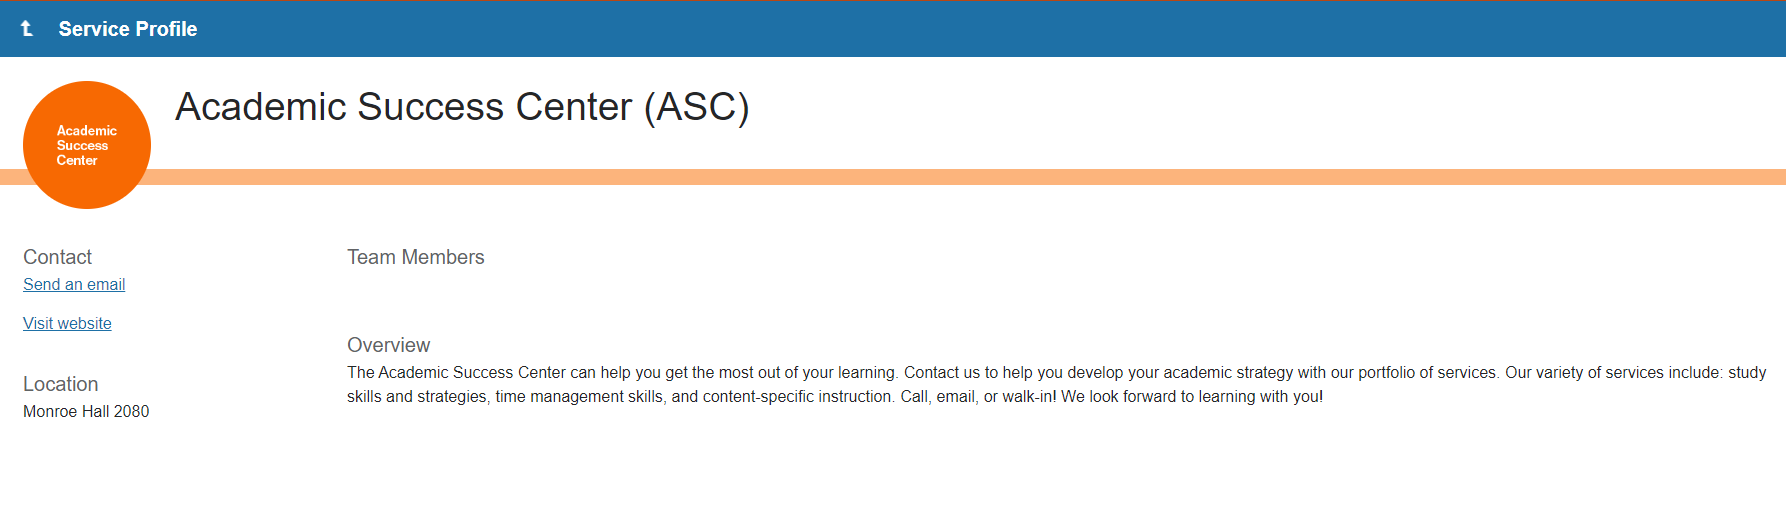 The ASC Service is displayed. On the left is a Contact menu that contains a hyperlink to an email and a website. Below is the physical campus location. To the right are Team Members Associated with the Service and a more in-depth description of the service. 